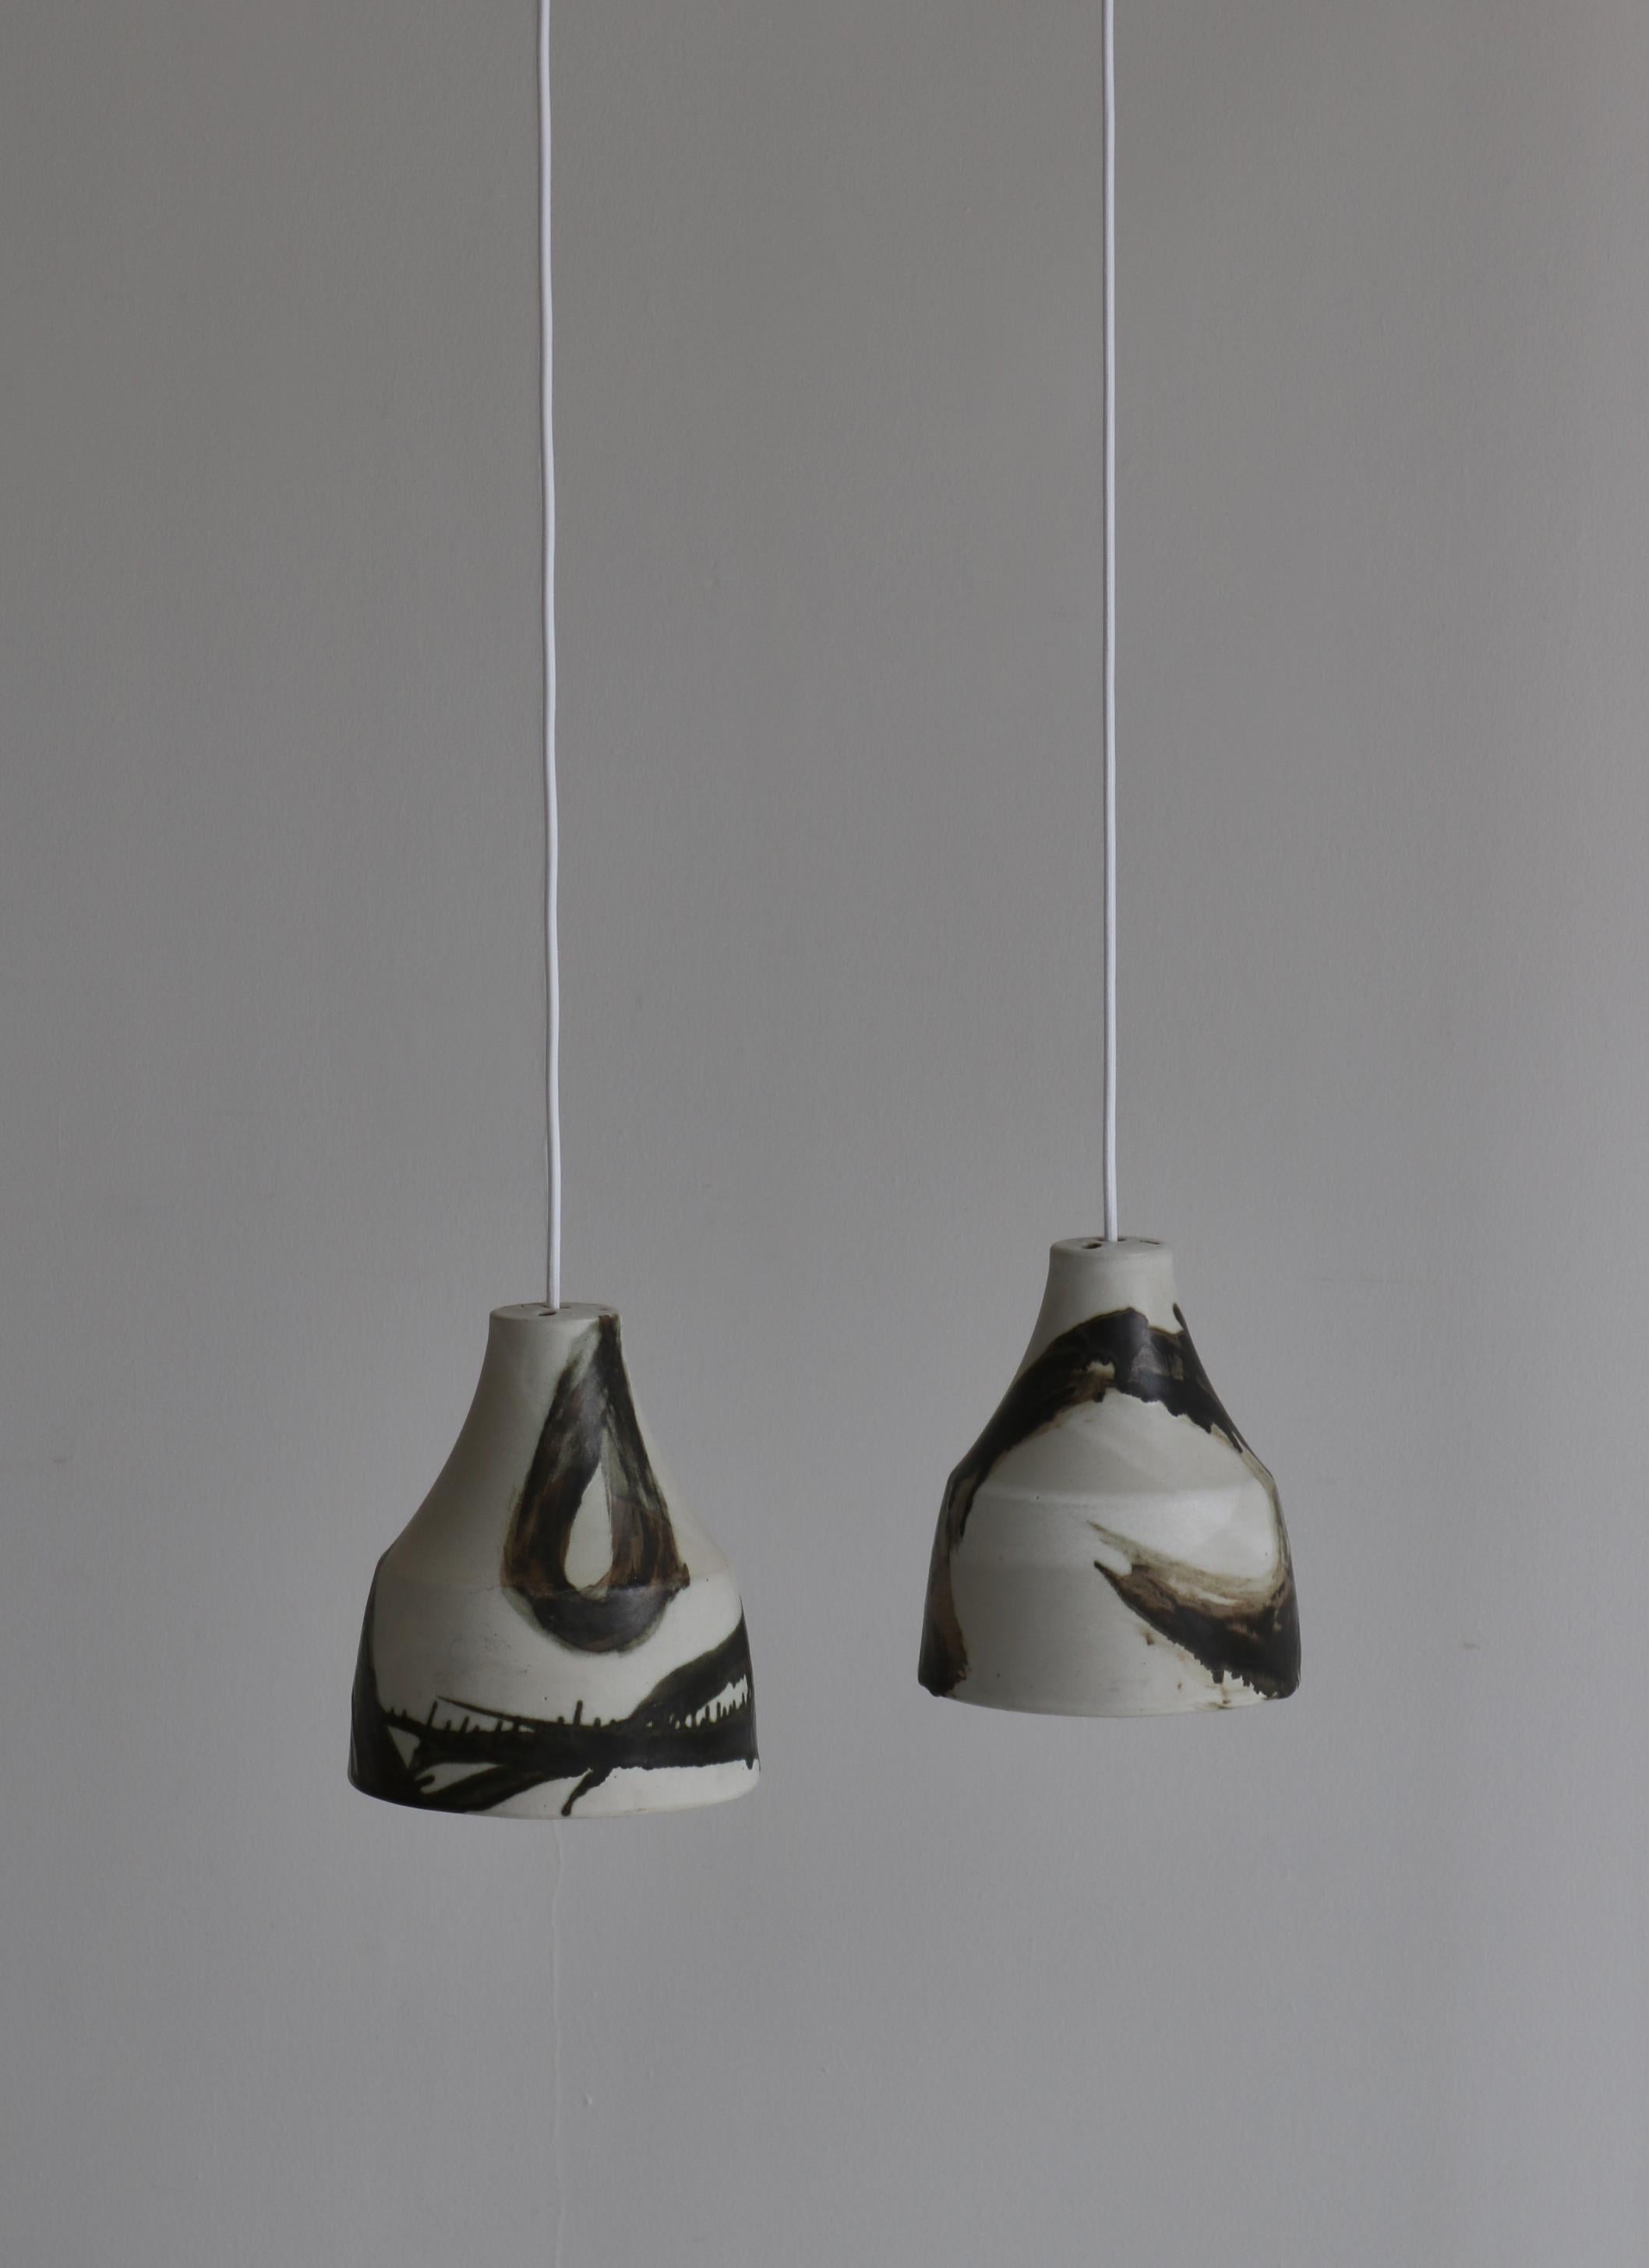 Unique Danish Søholm Stoneware Lamps in Light Glazing and Earth Colors, 1960s For Sale 7